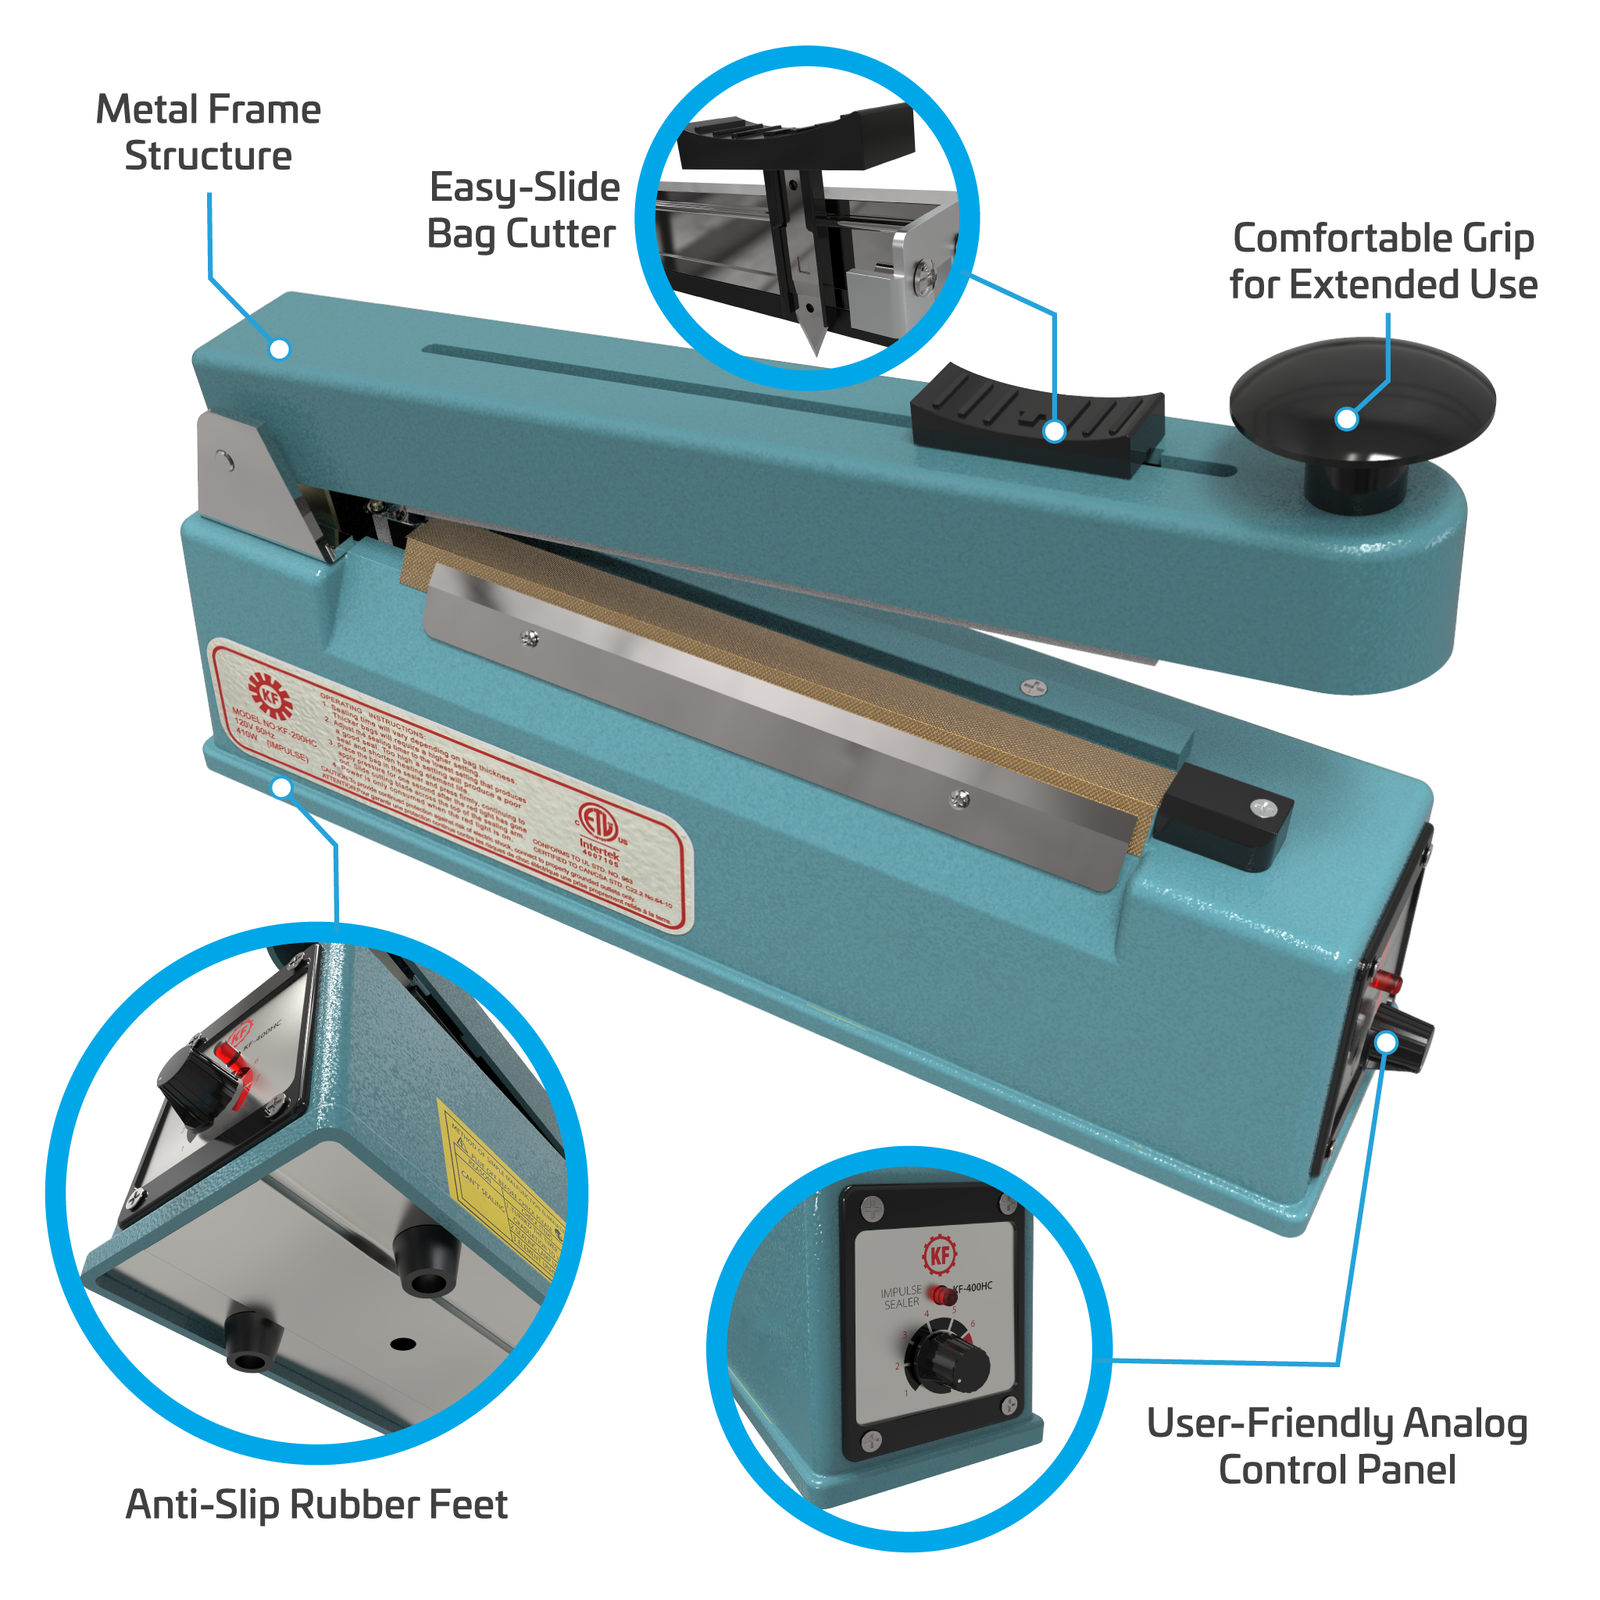 8 inch manual impulse sealer. Features include, Metal Frame Structure, Easy-slide bag cutter, Comfortable Grip for Extended Use, Anti-slip Rubber Feet, and User Friendly Analog Control Panel. Close-ups of rubber feet and control panel